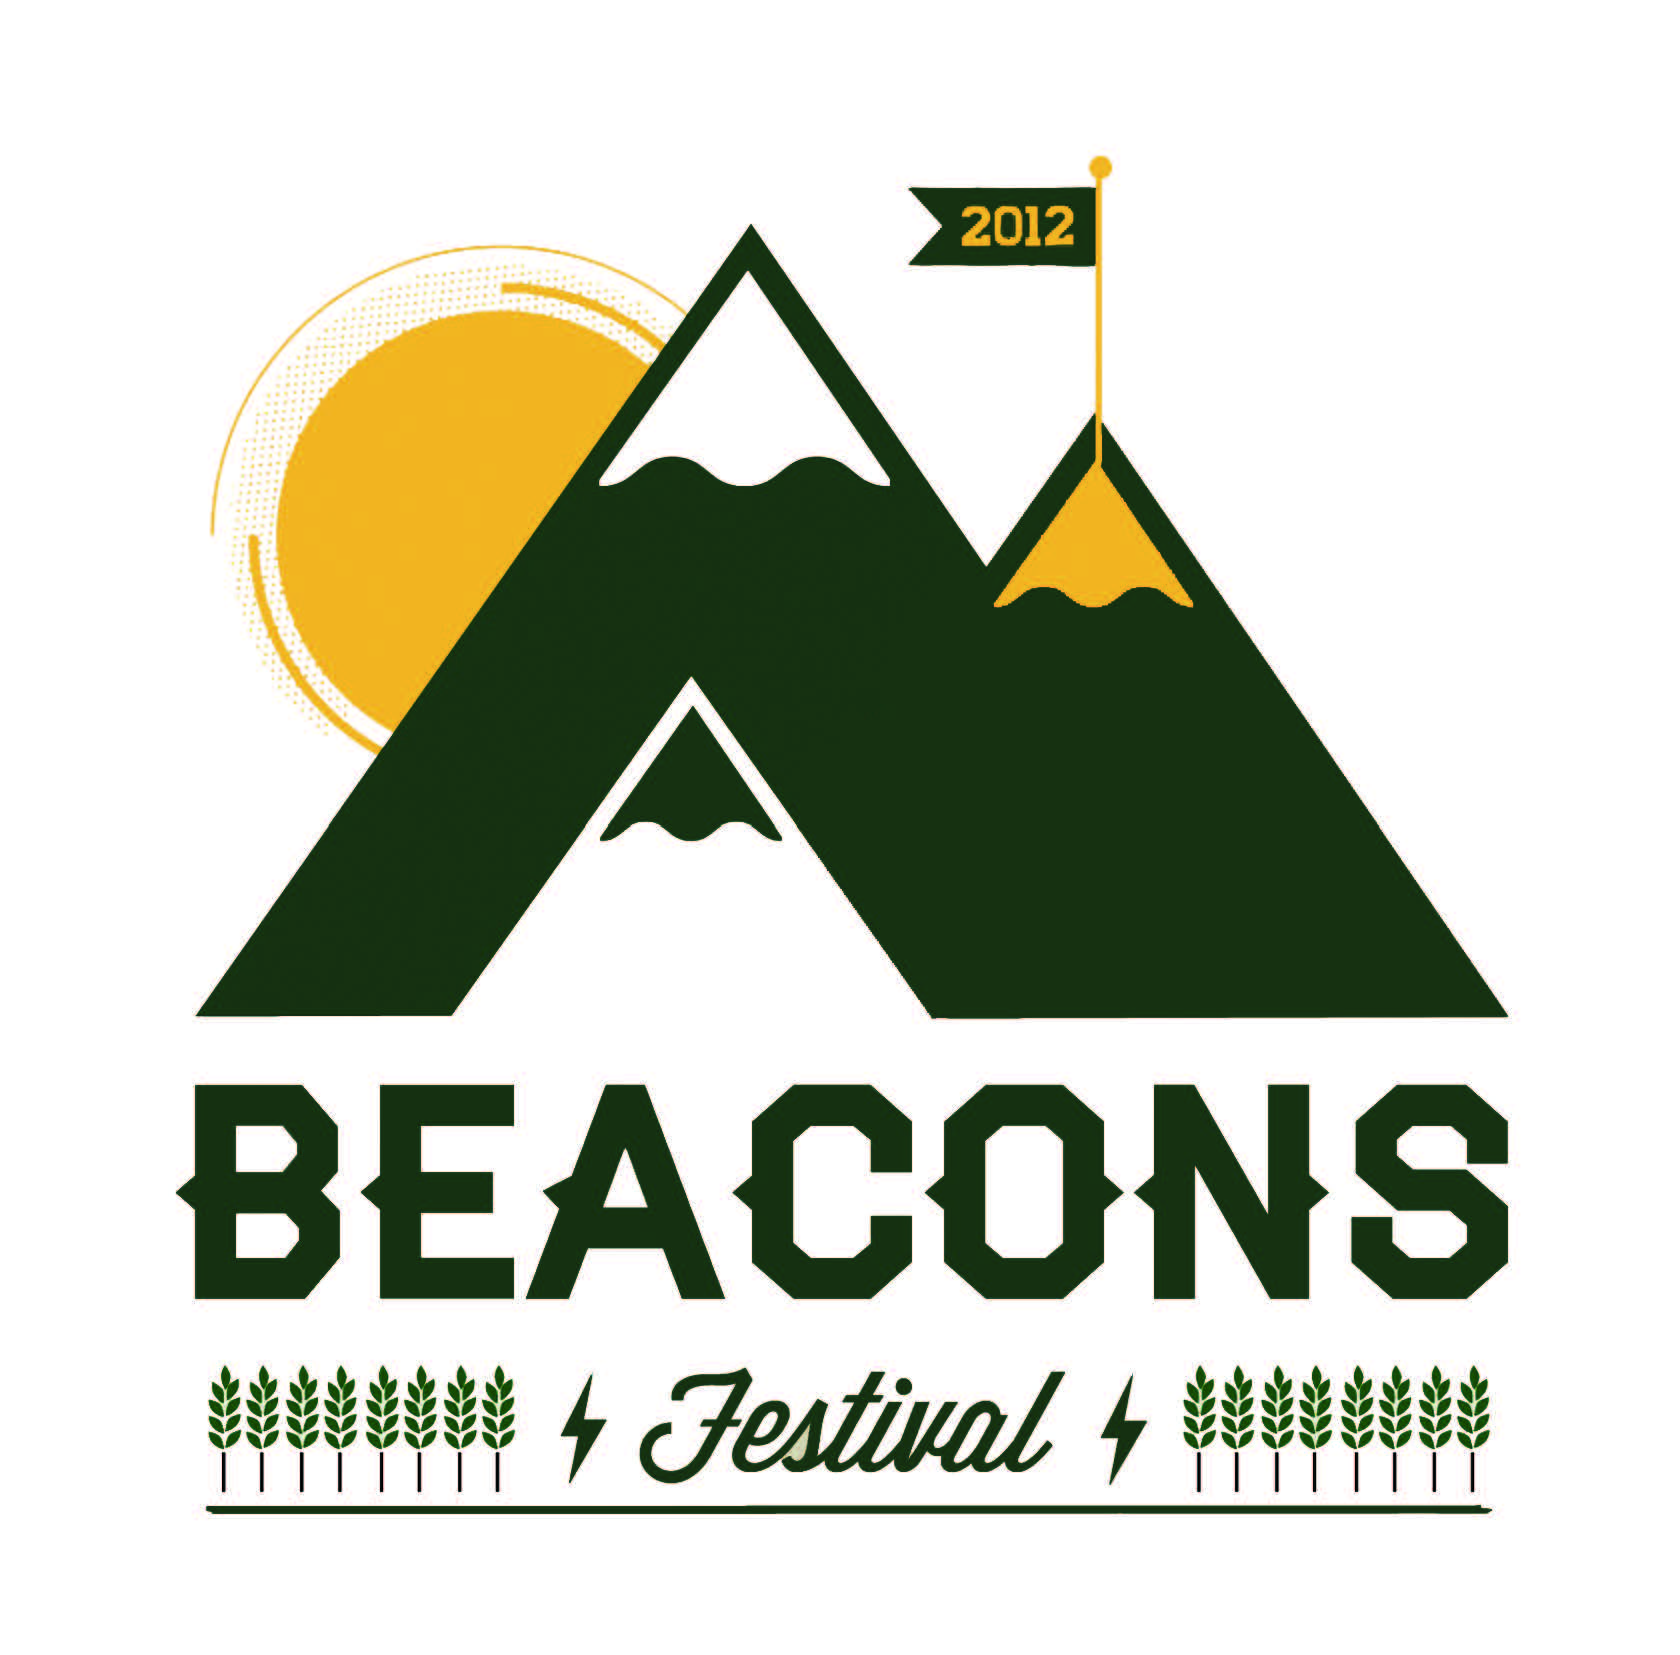 Beacons Festival adds 30 more acts to complete this years line-up